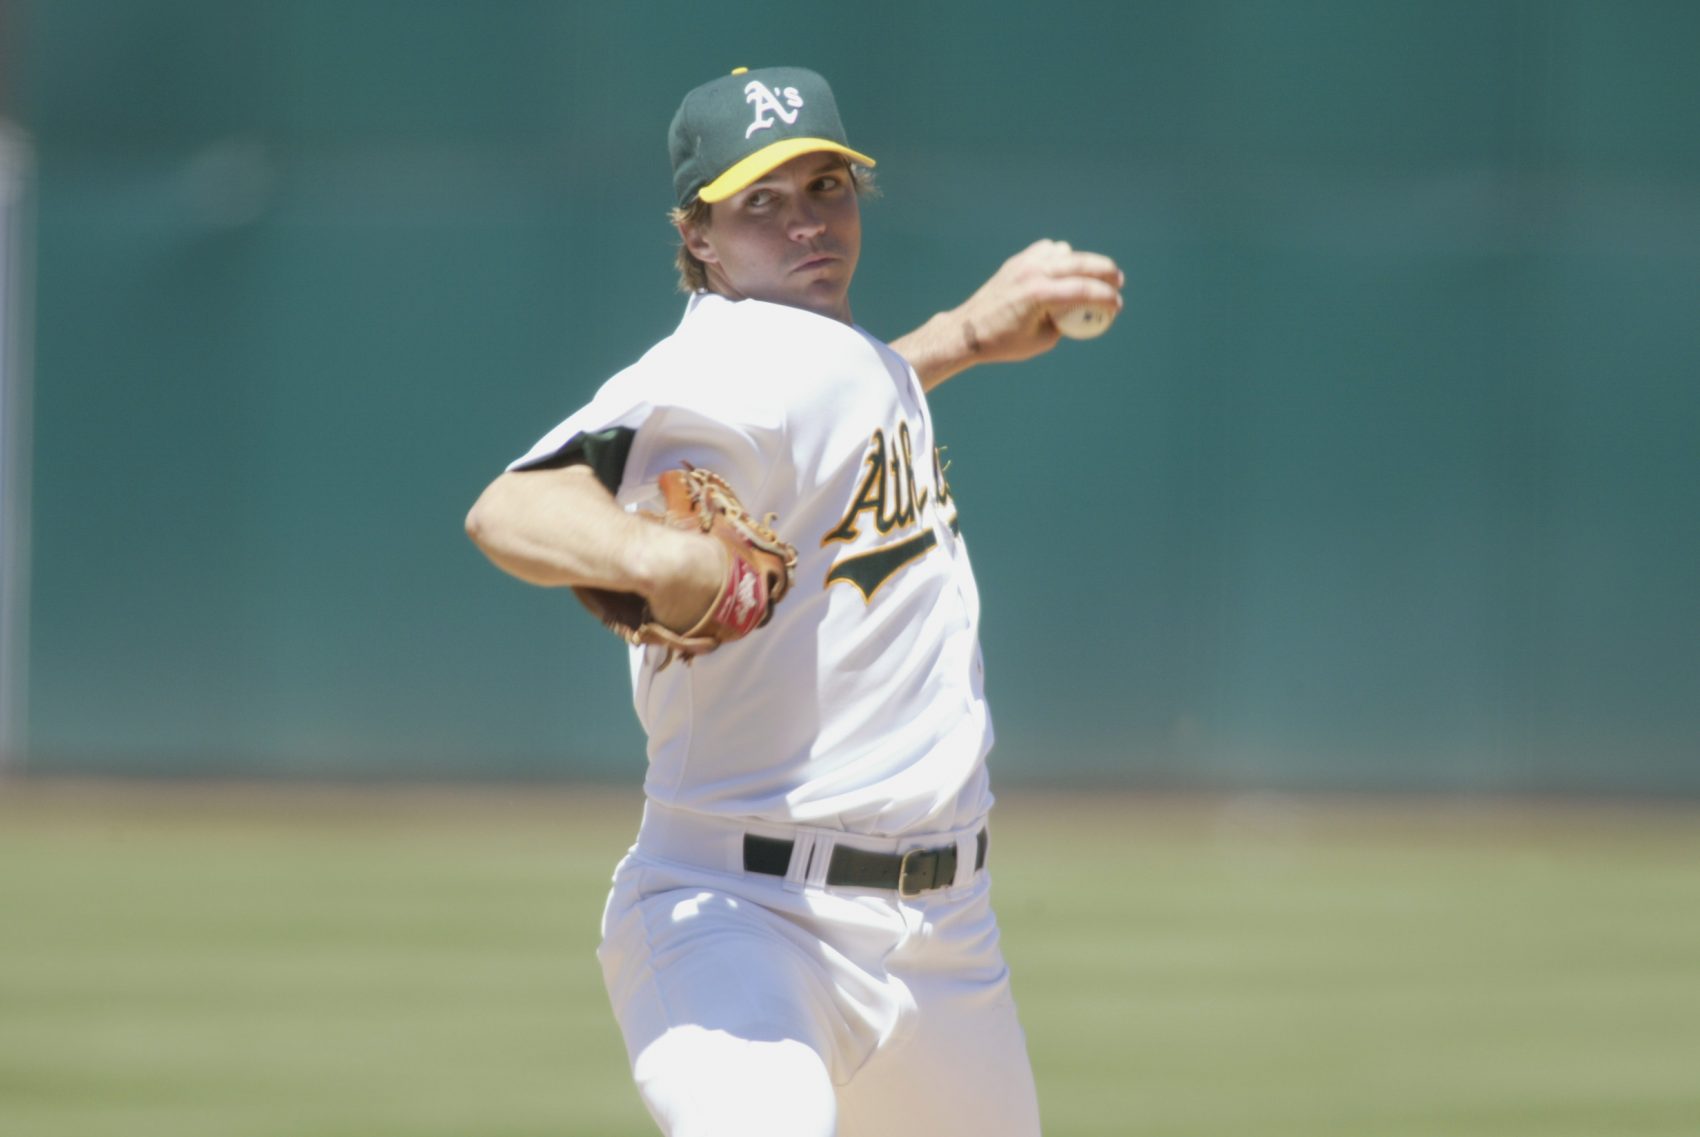 Barry Zito MLB Jerseys for sale